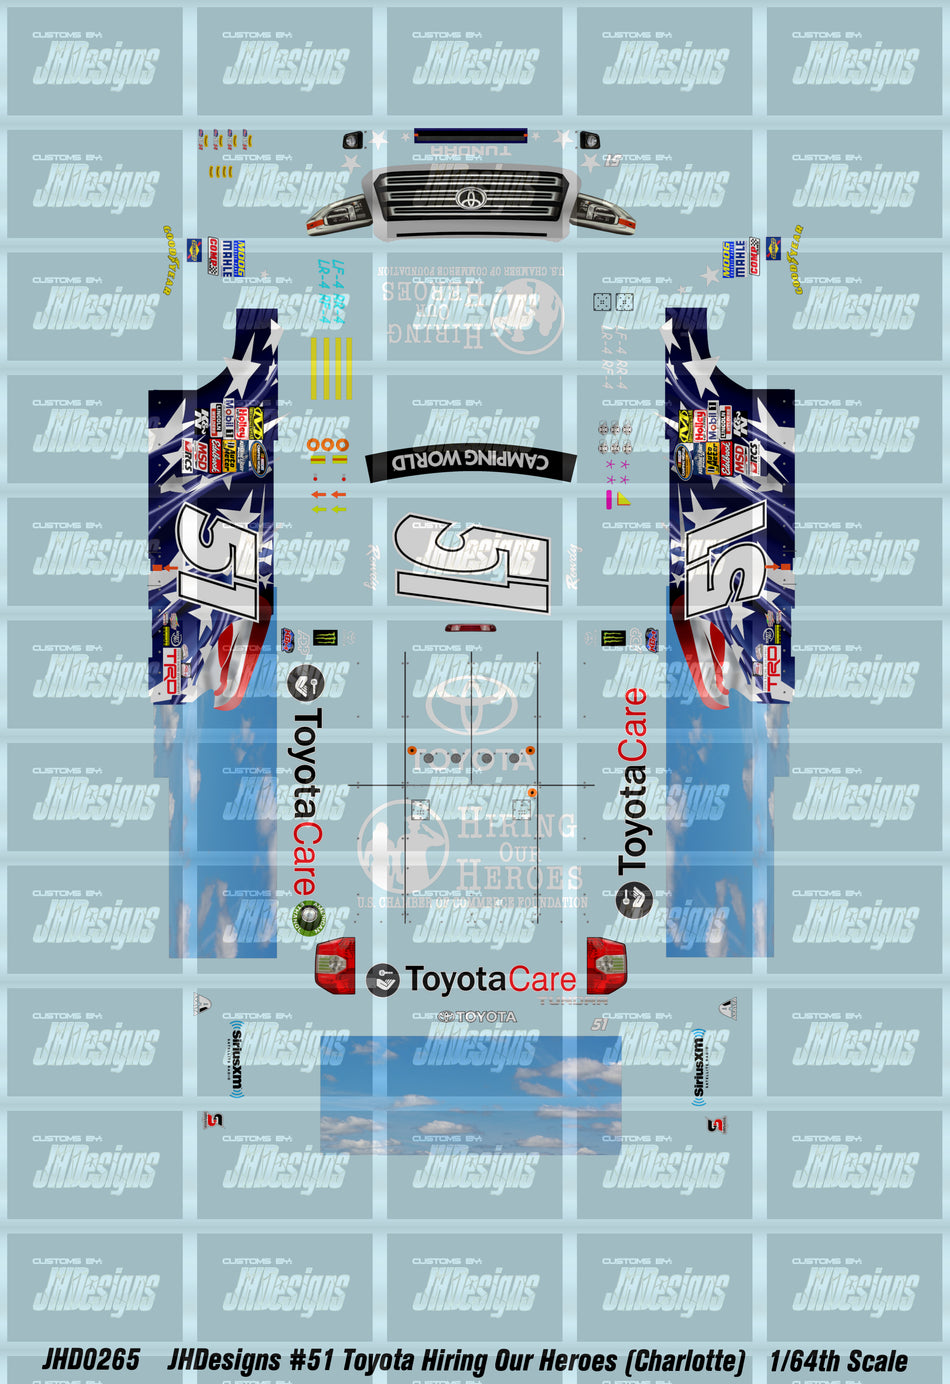 JH Designs Kyle Busch 2014 CWTS #51 Toyota Hiring Our Heroes (Charlotte Race Win) 1:64 Racecar Decal Set